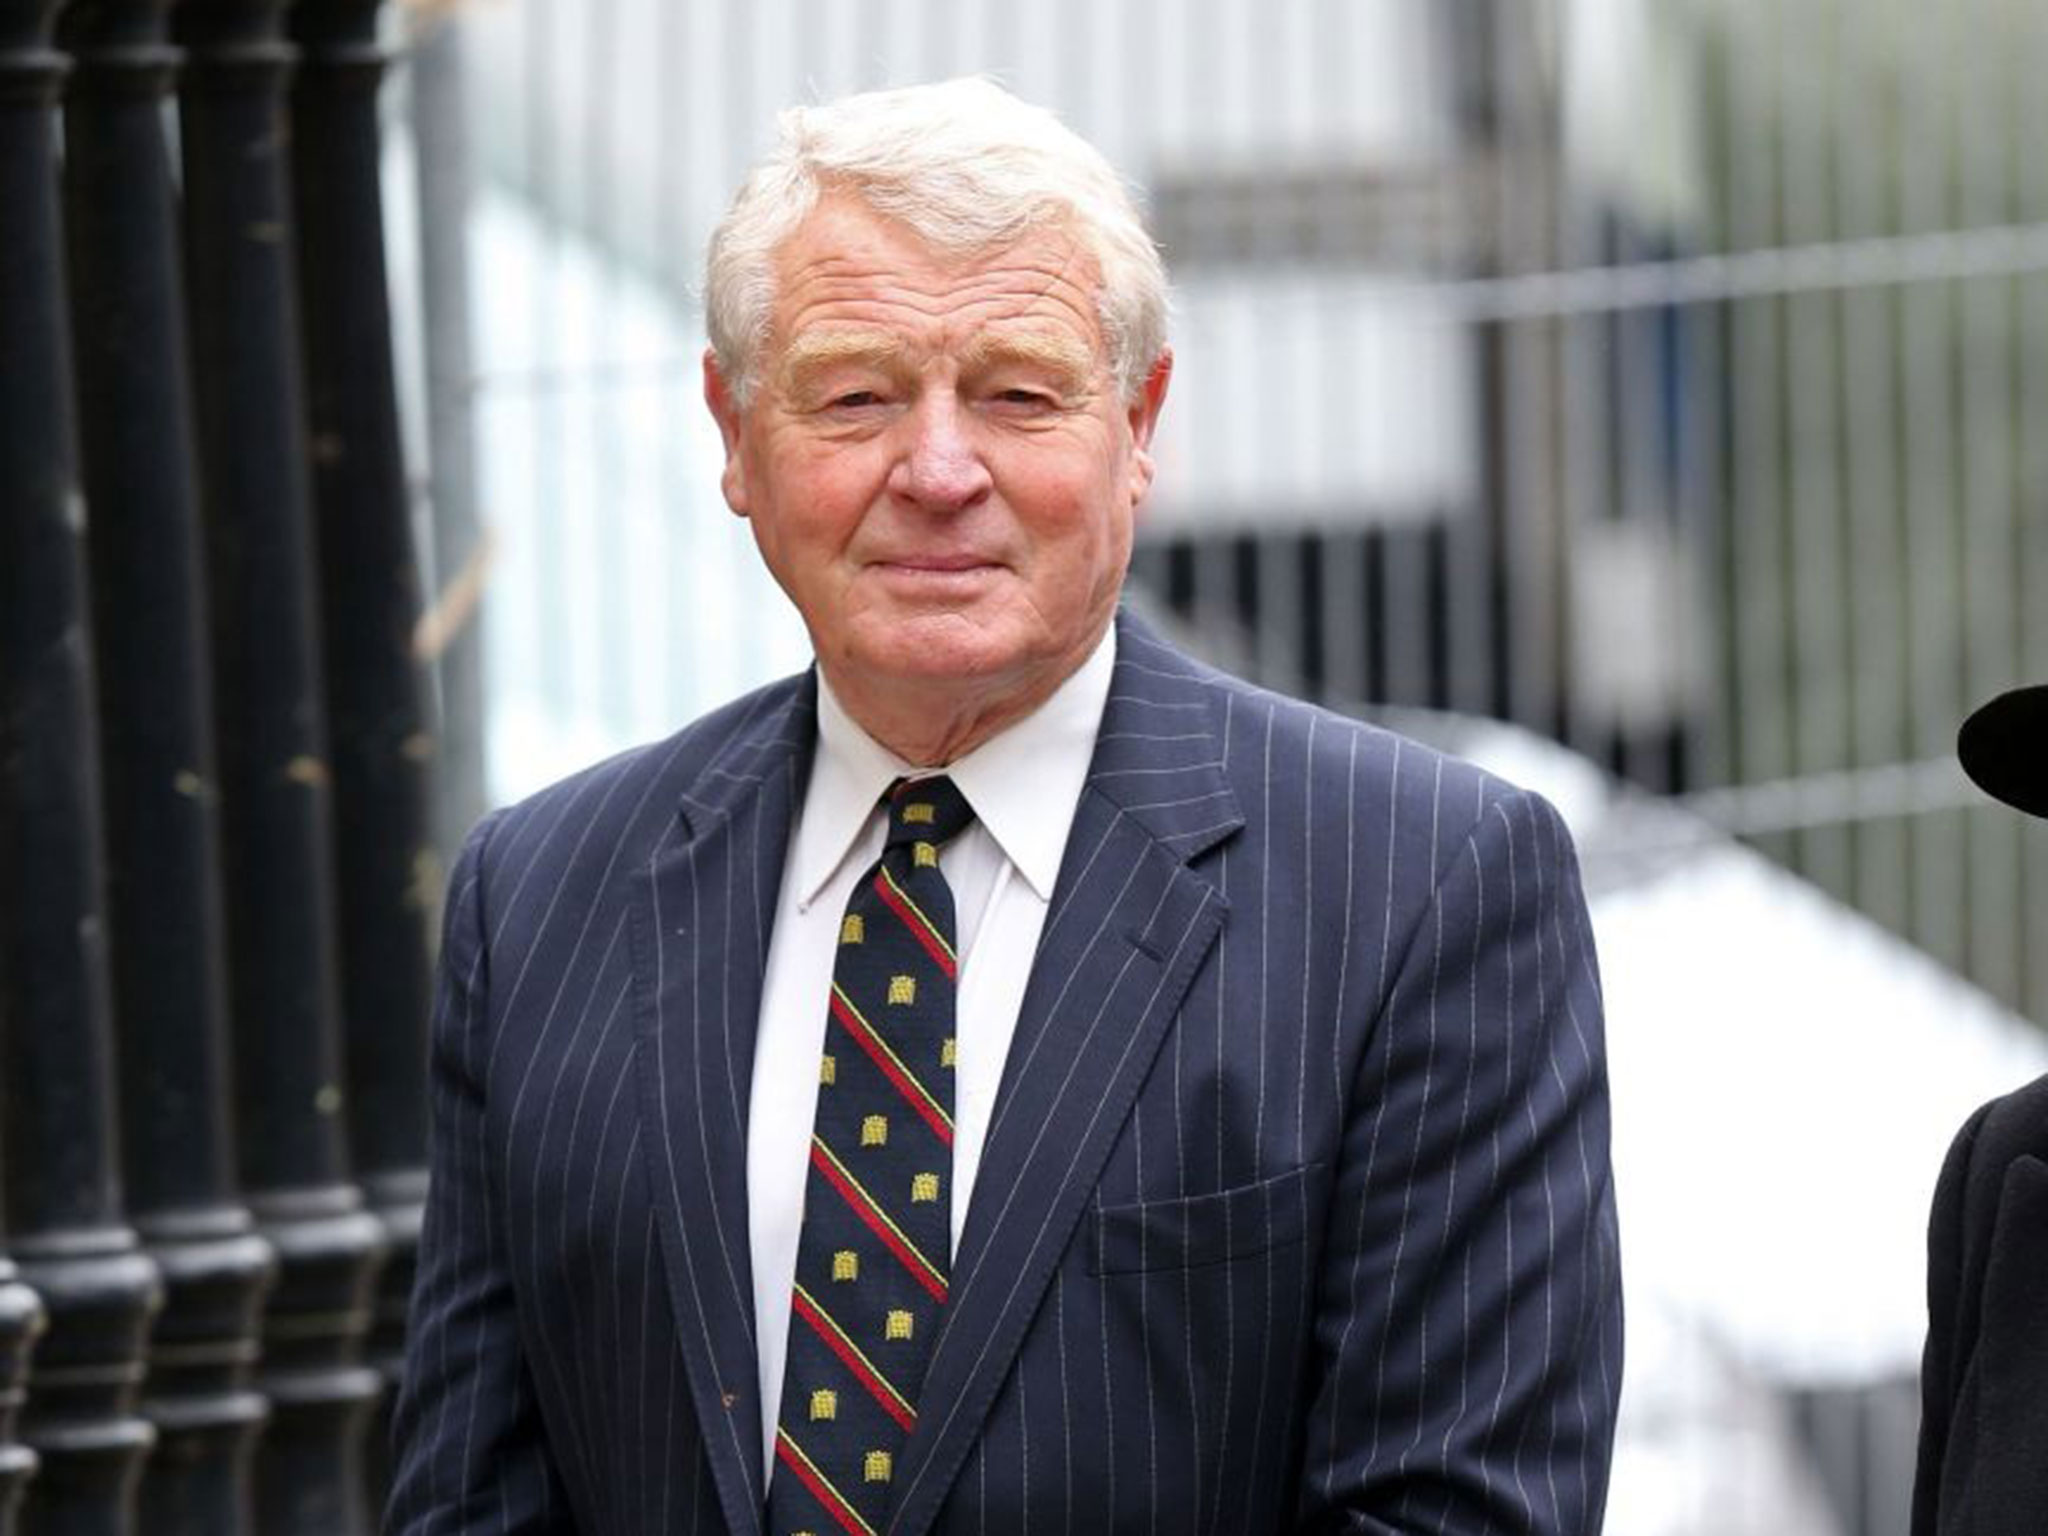 The former Liberal Democrat leader Lord Ashdown branded Israel’s attacks on Gaza as “disproportionate”